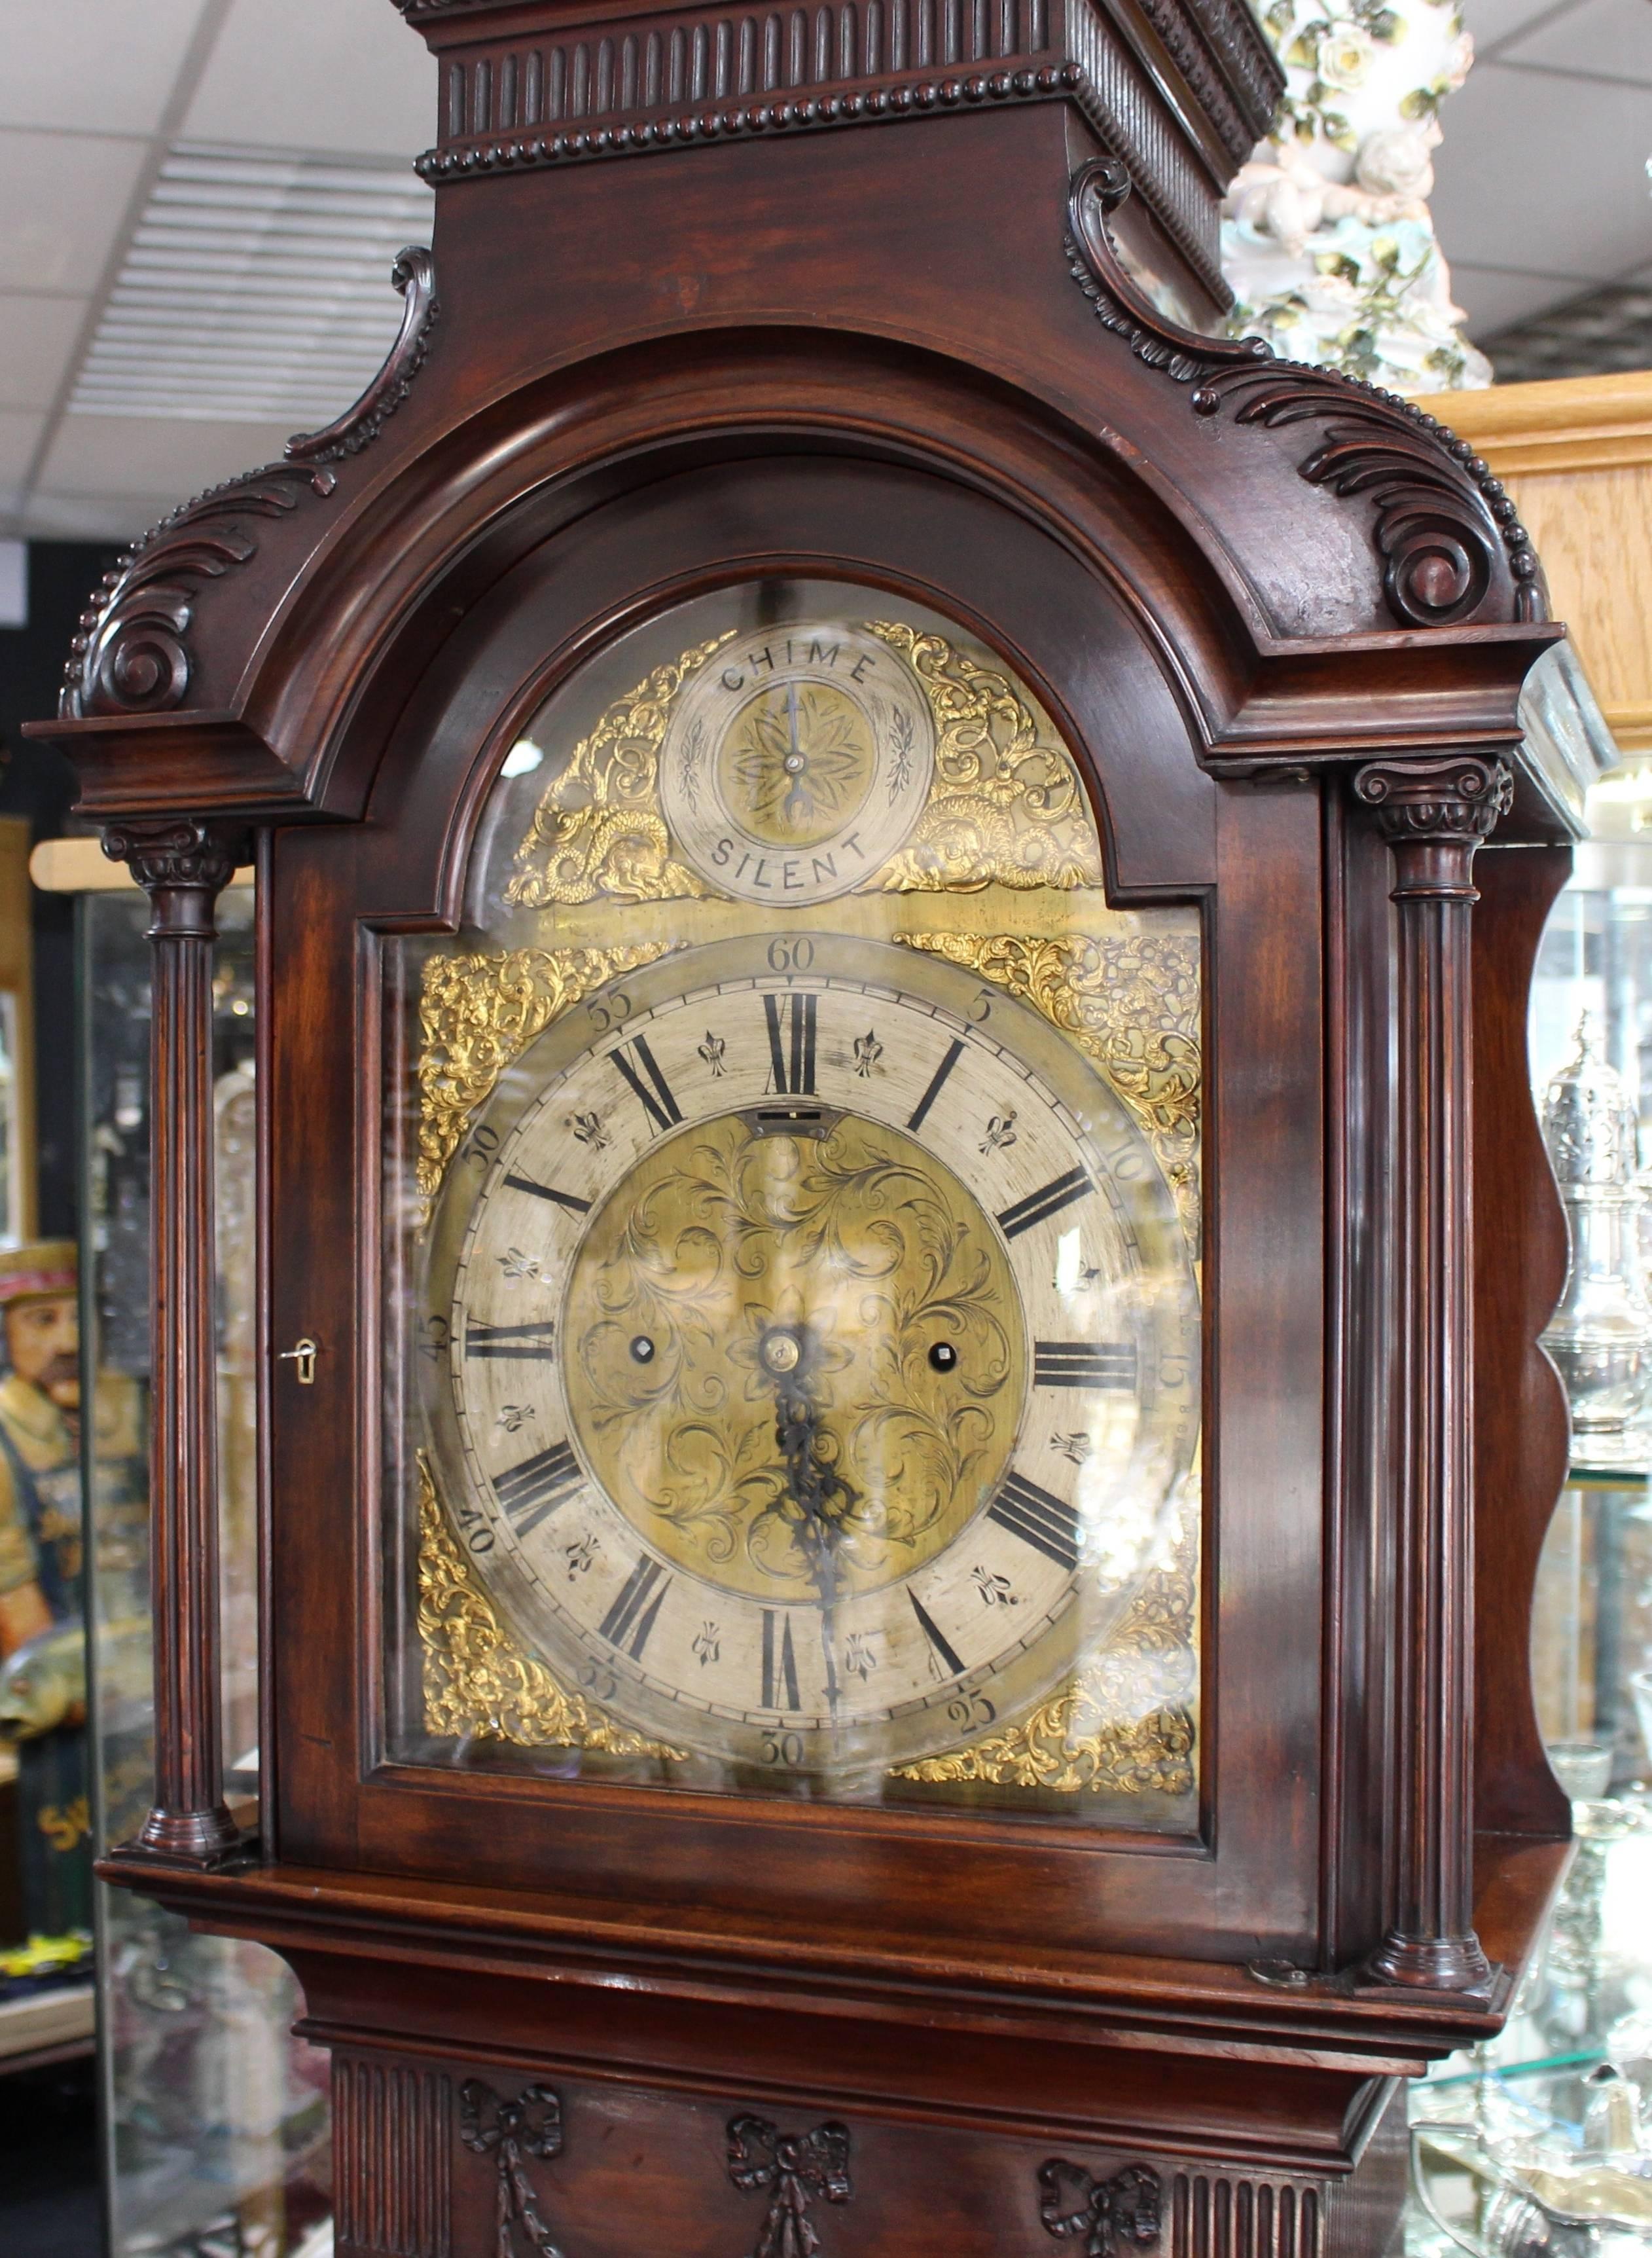 Period Edwardian.
Width 57 cm / 22 1/2 in.
Depth 37 cm / 14 1/2 in.
Height 212 cm / 83 1/2 in.
Dial brass arched dial with silvered chapter ring, brass spandrels to each corner. Blued steel hands with Roman numerals. Three winding holes,